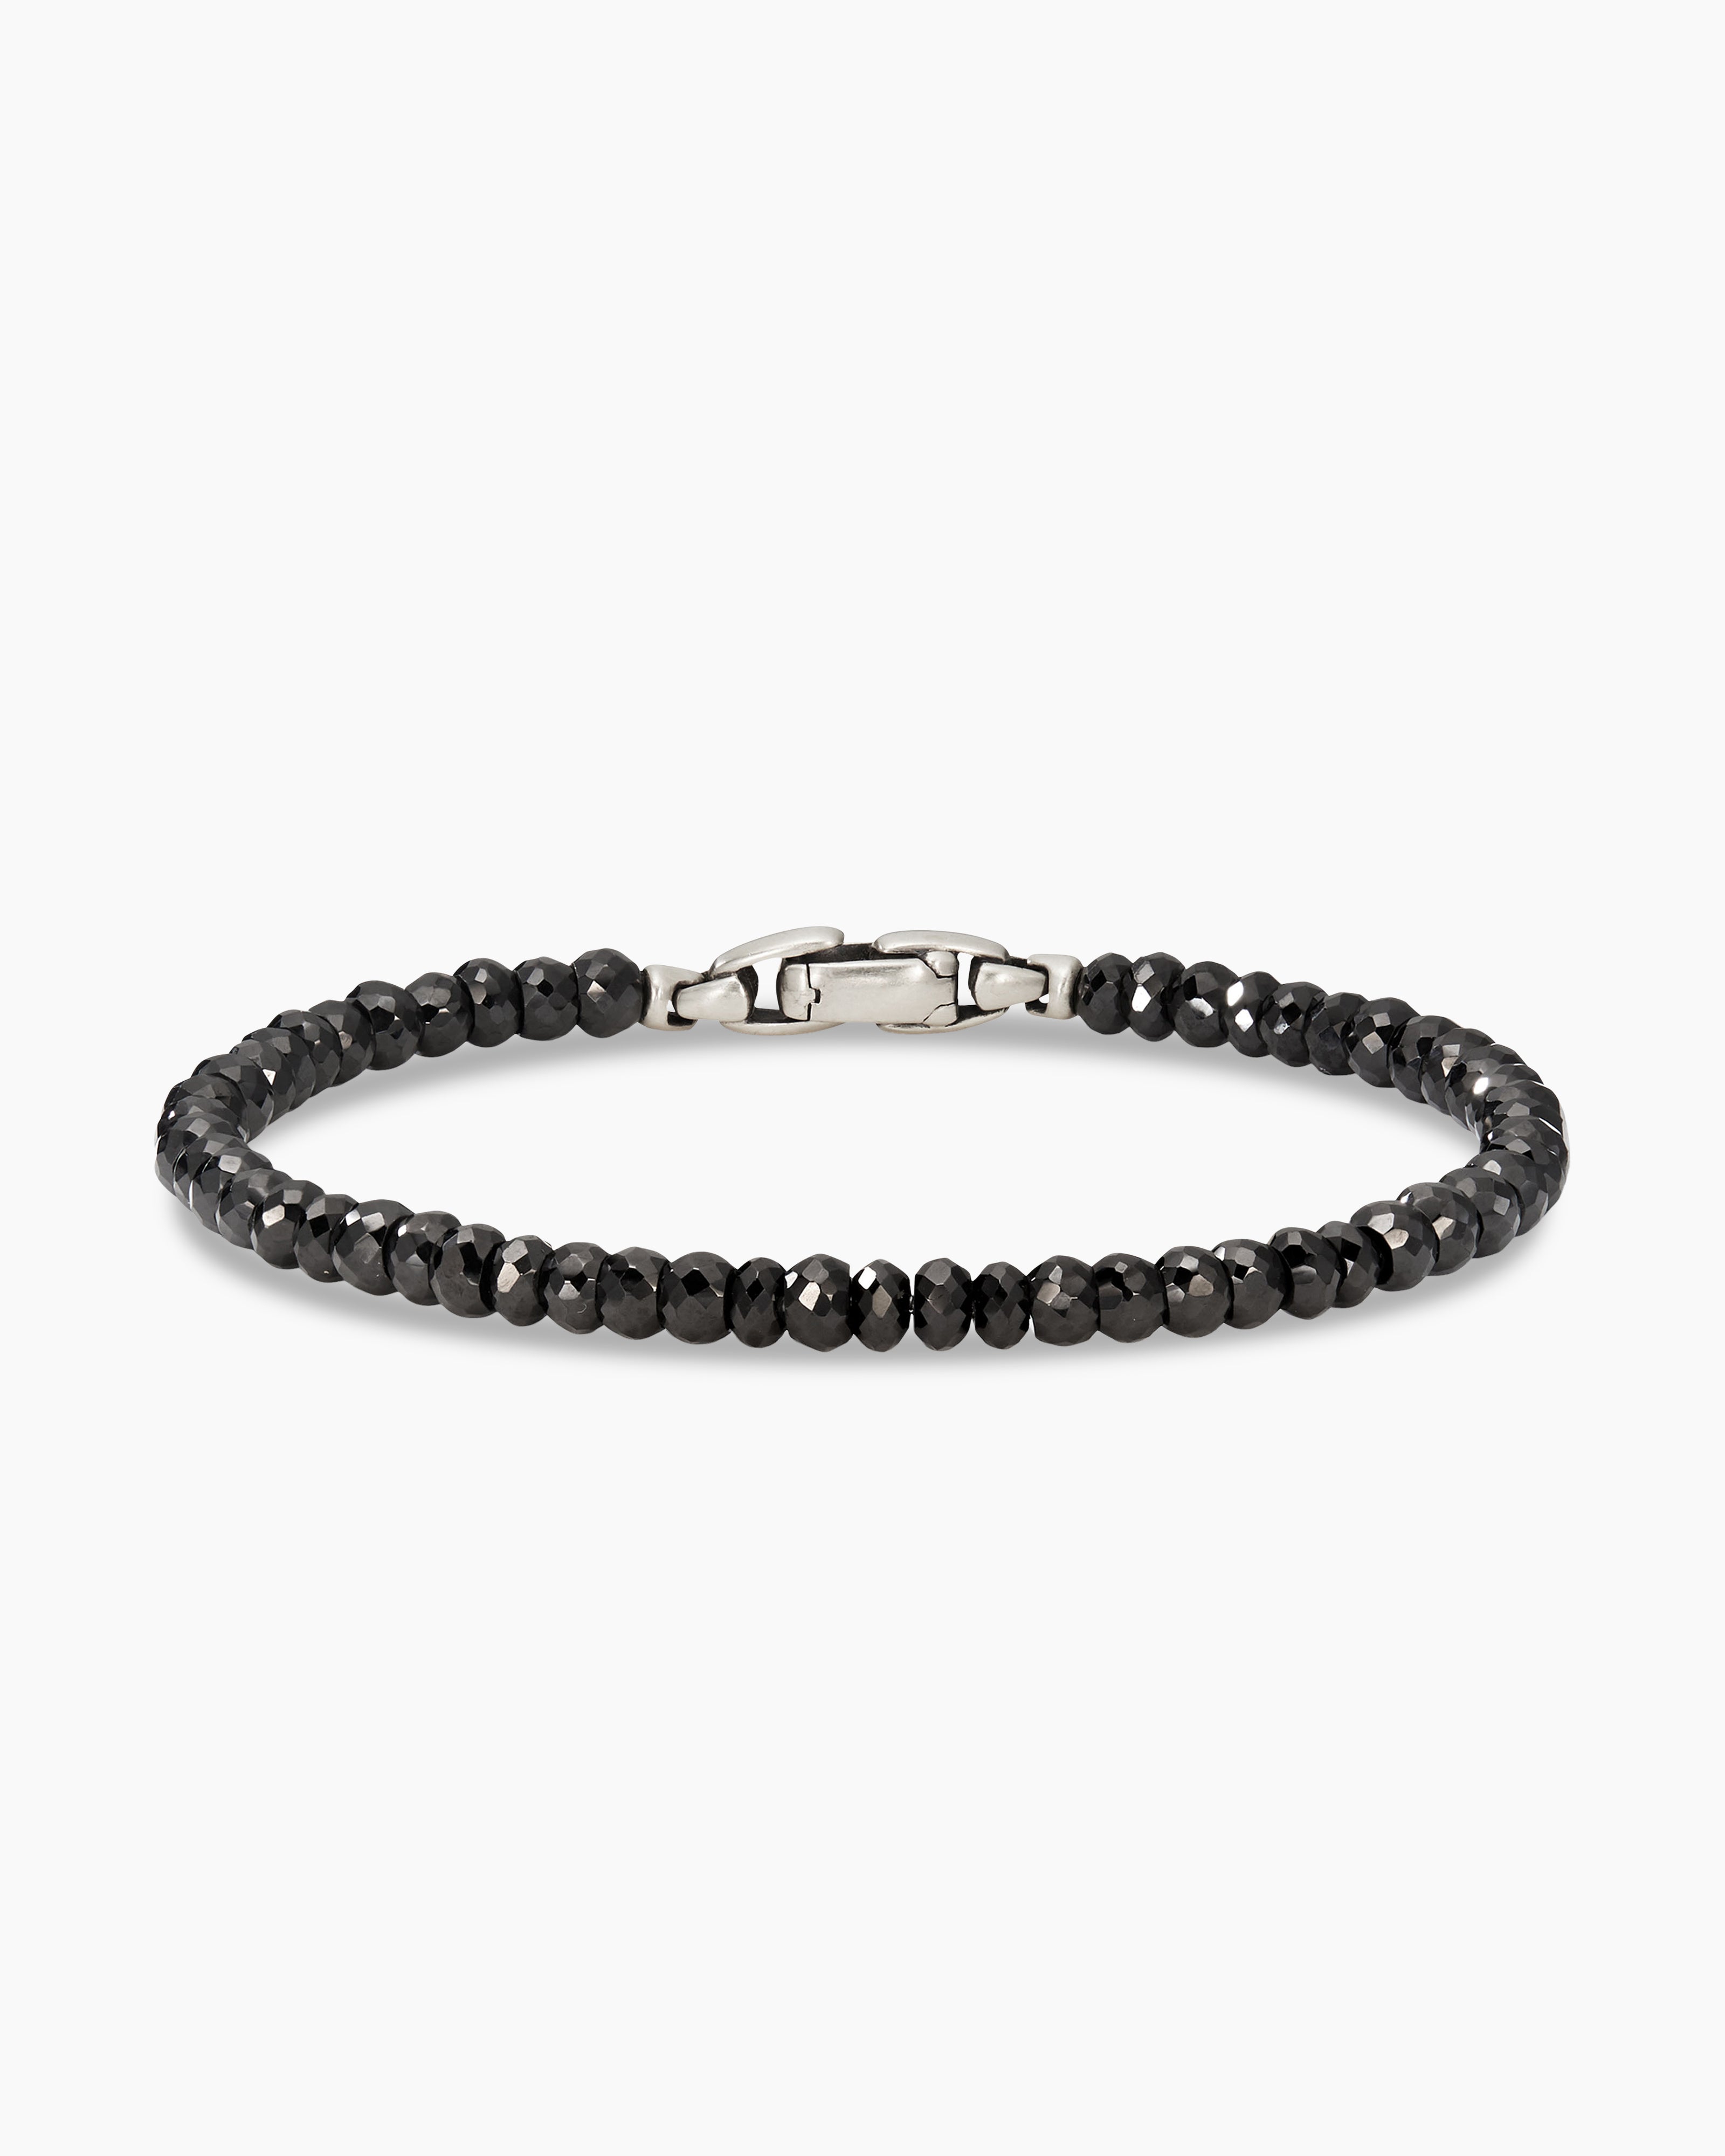 Black Round (Multi-Size) Agate Beaded Bracelet With Sterling Silver |  Elasaro